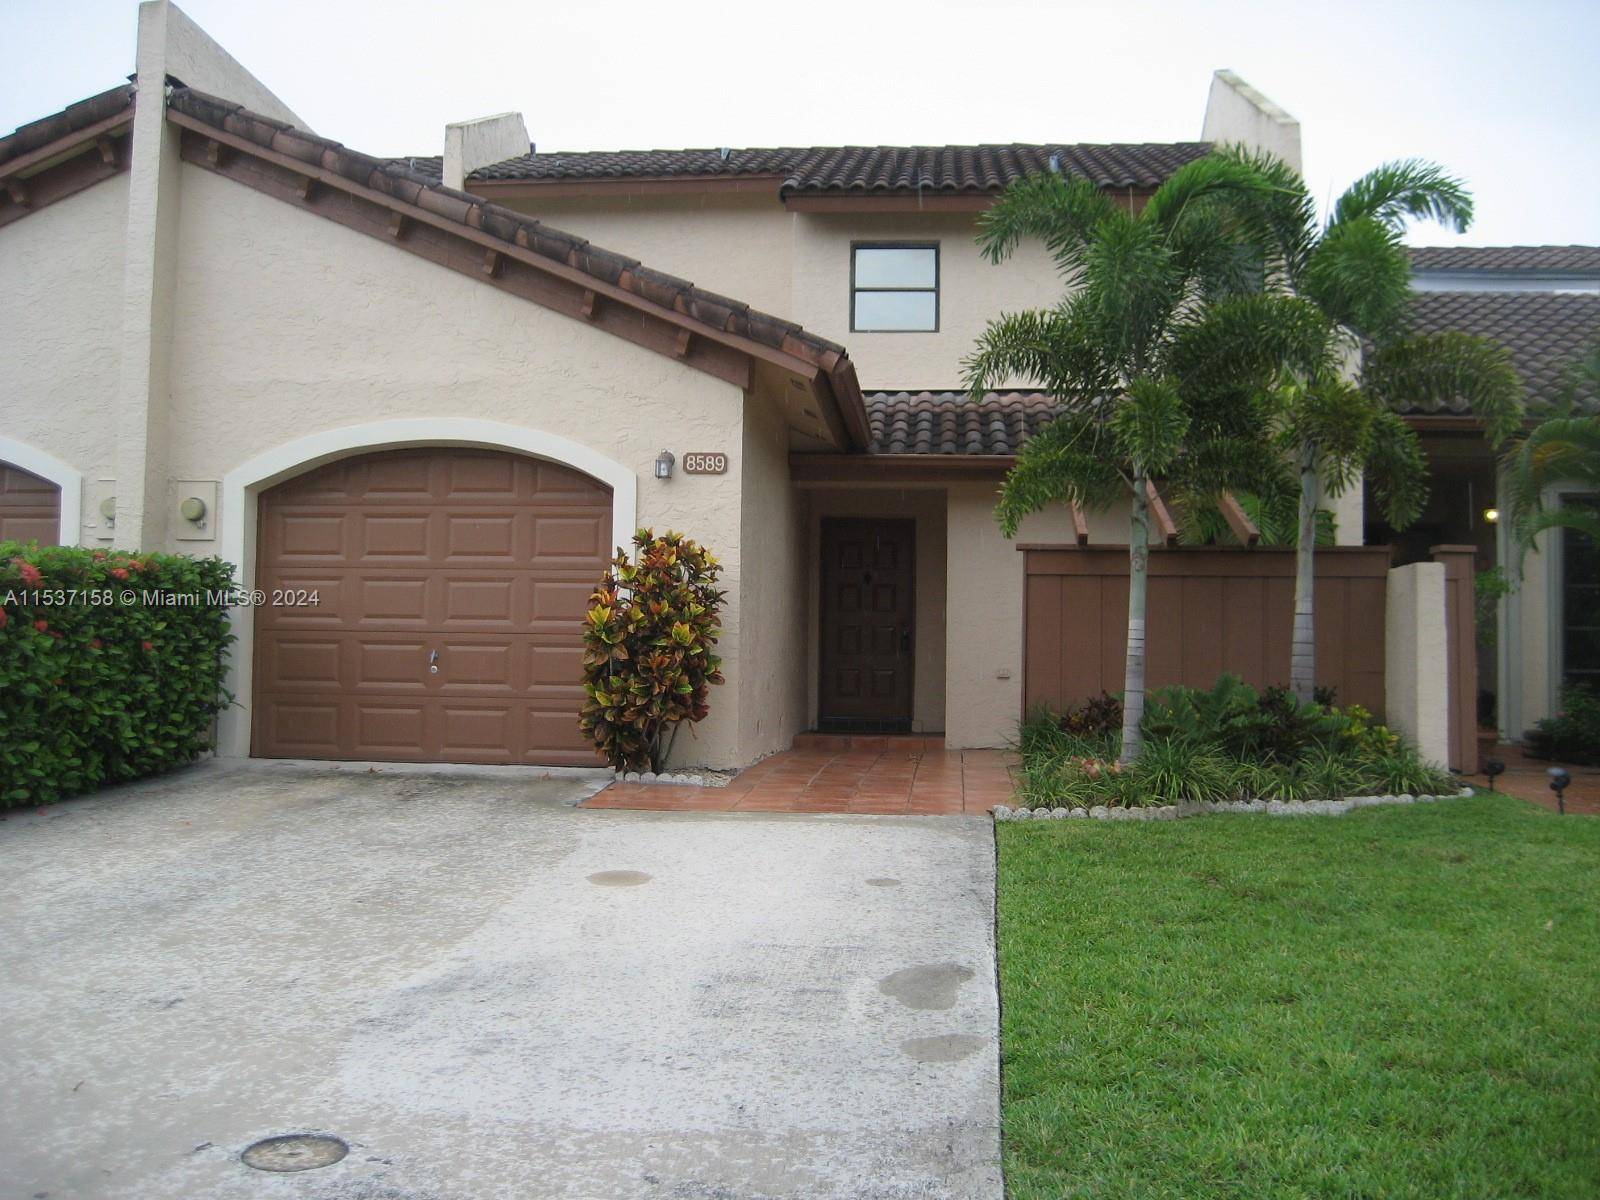 BEAUTIFUL LARGEST TWO STORY TOWNHOUSE IN THE NICEST COMMUNITY OF KENDALL WITH SECURITY GUARDS GREAT GATE ACCESS, 3 BEDROOMS, 2.